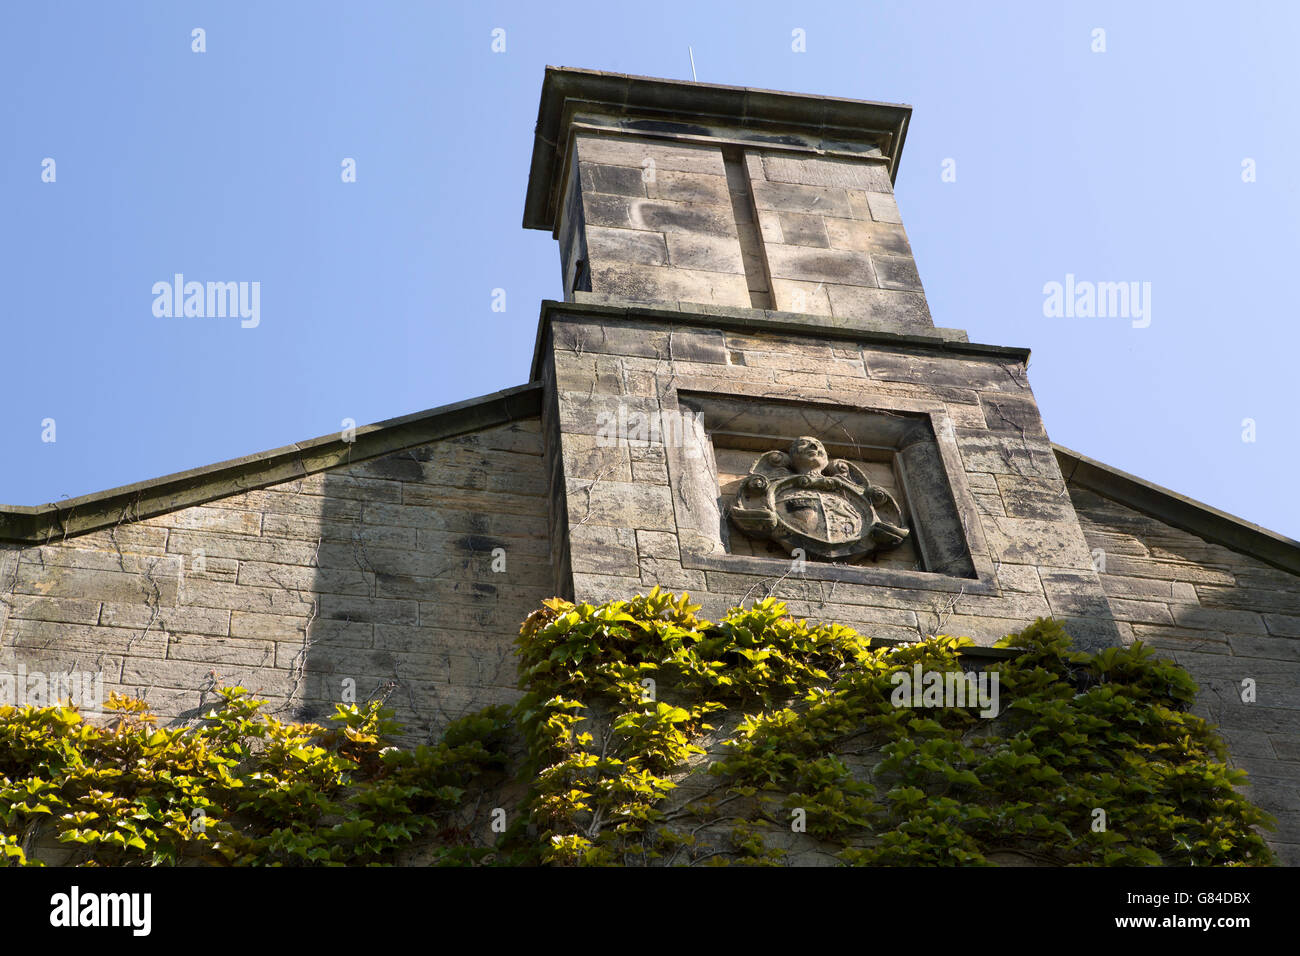 Chimney breast featuring a coat of arms at Matfen Hall in Northumberland, England. Stock Photo